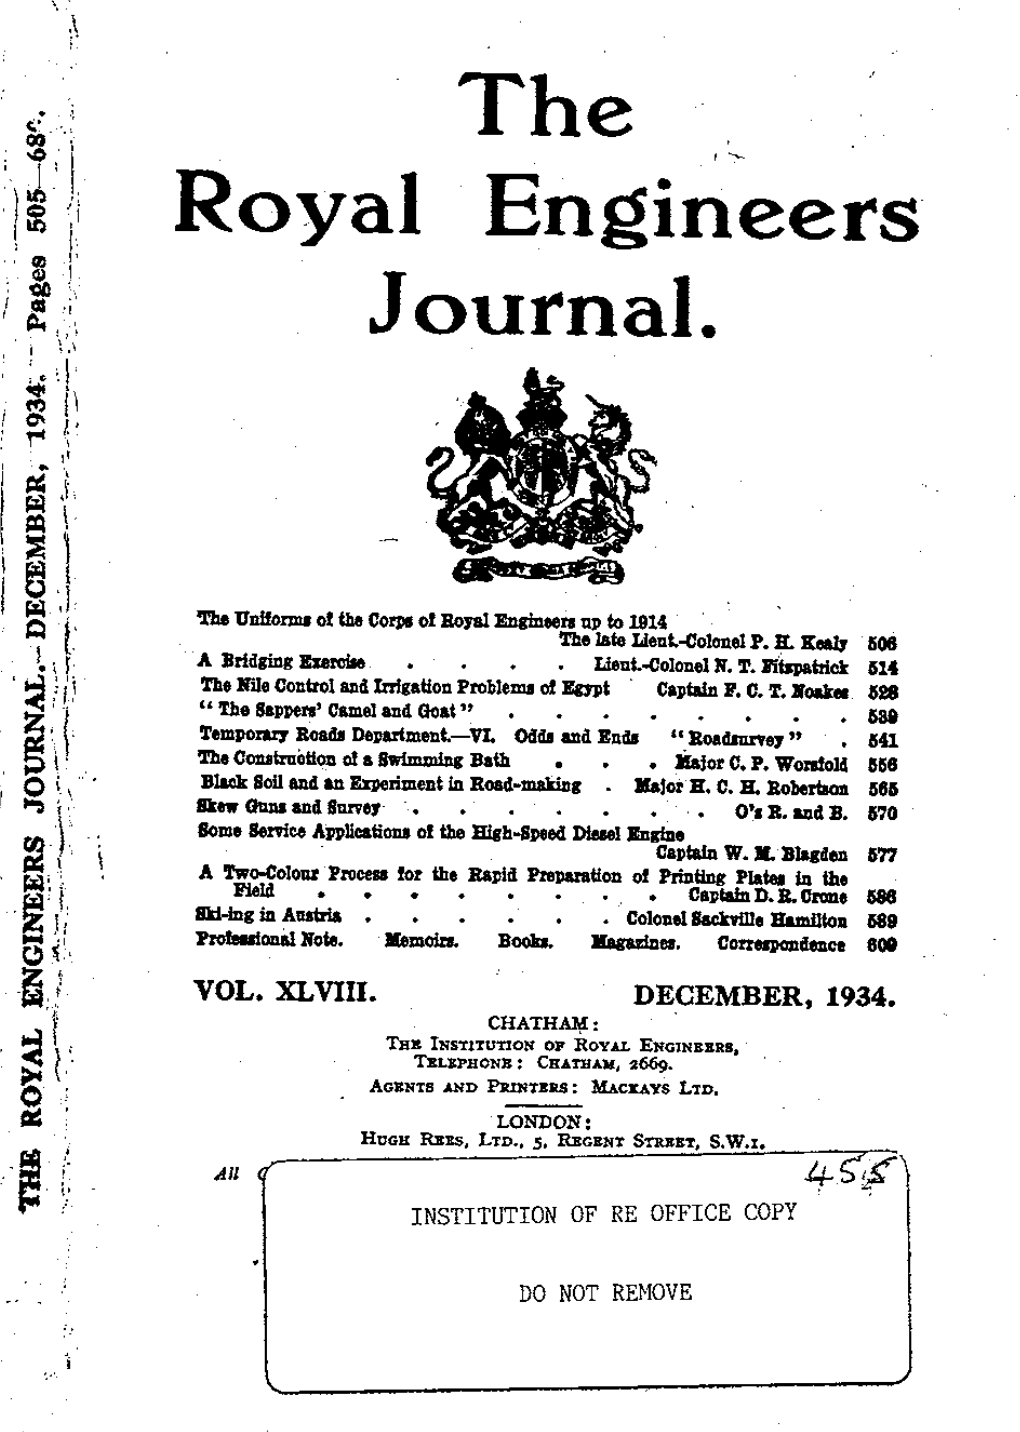 The Royal Engineers I, Journal